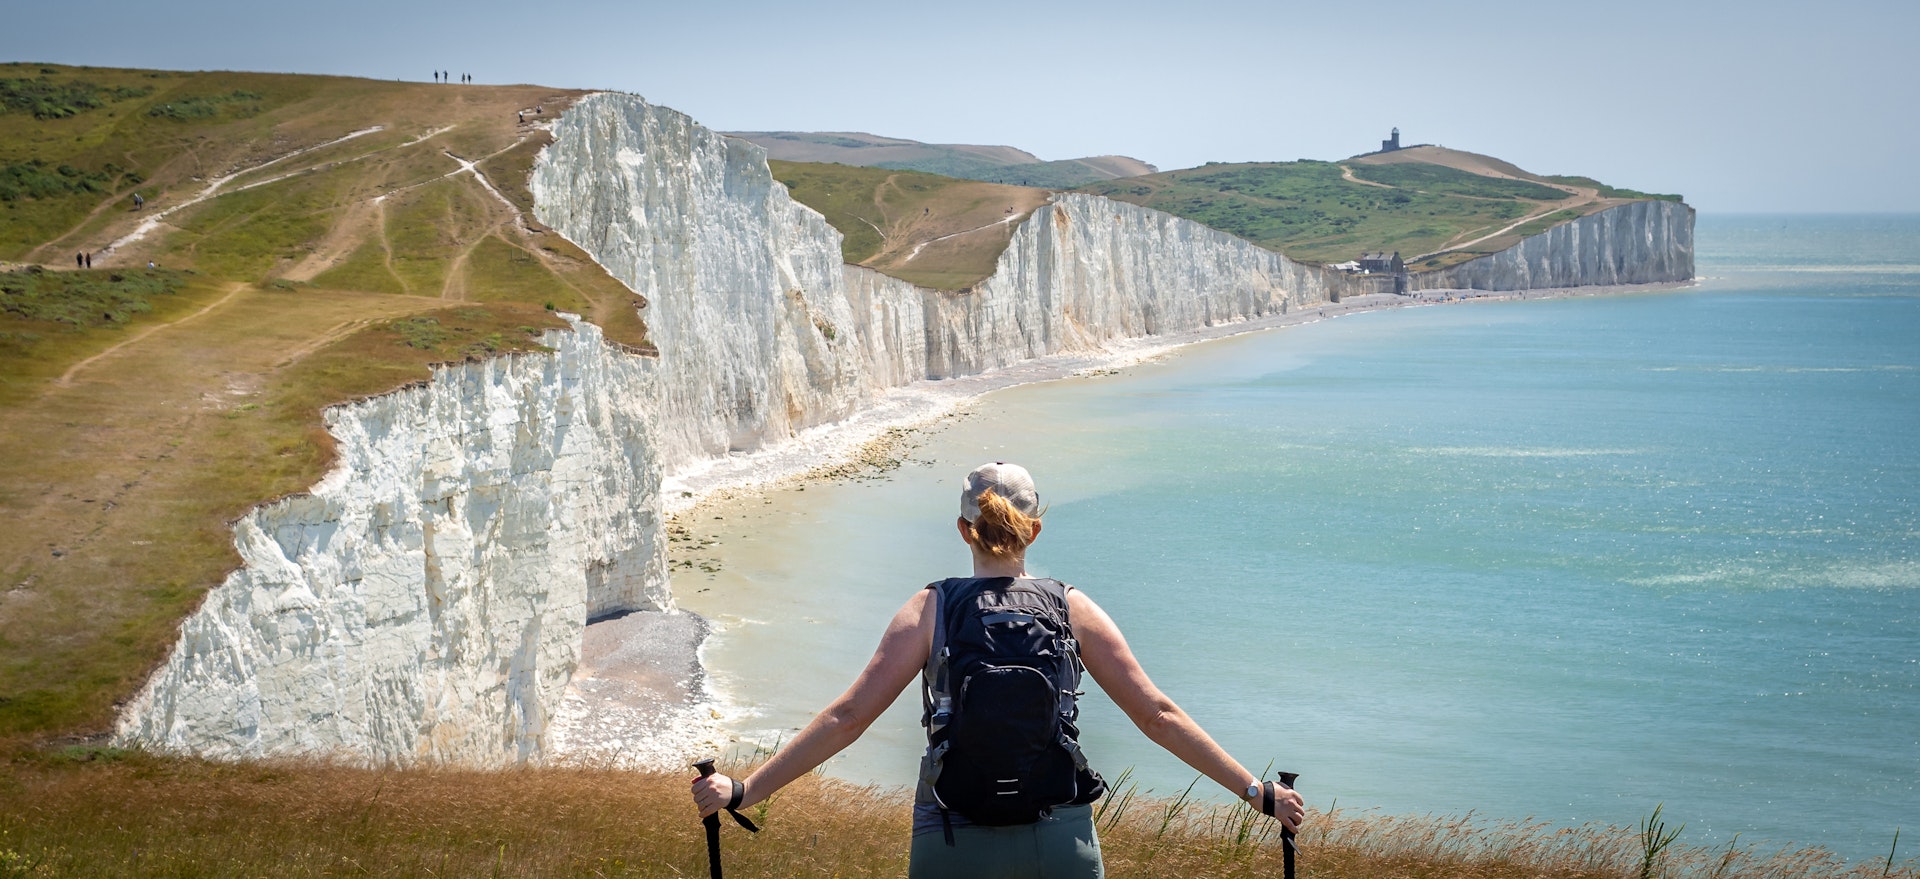 A hiker stands on a trail looking ahead at white chalk cliffs that rise and fall along the coastline on the South Downs Way